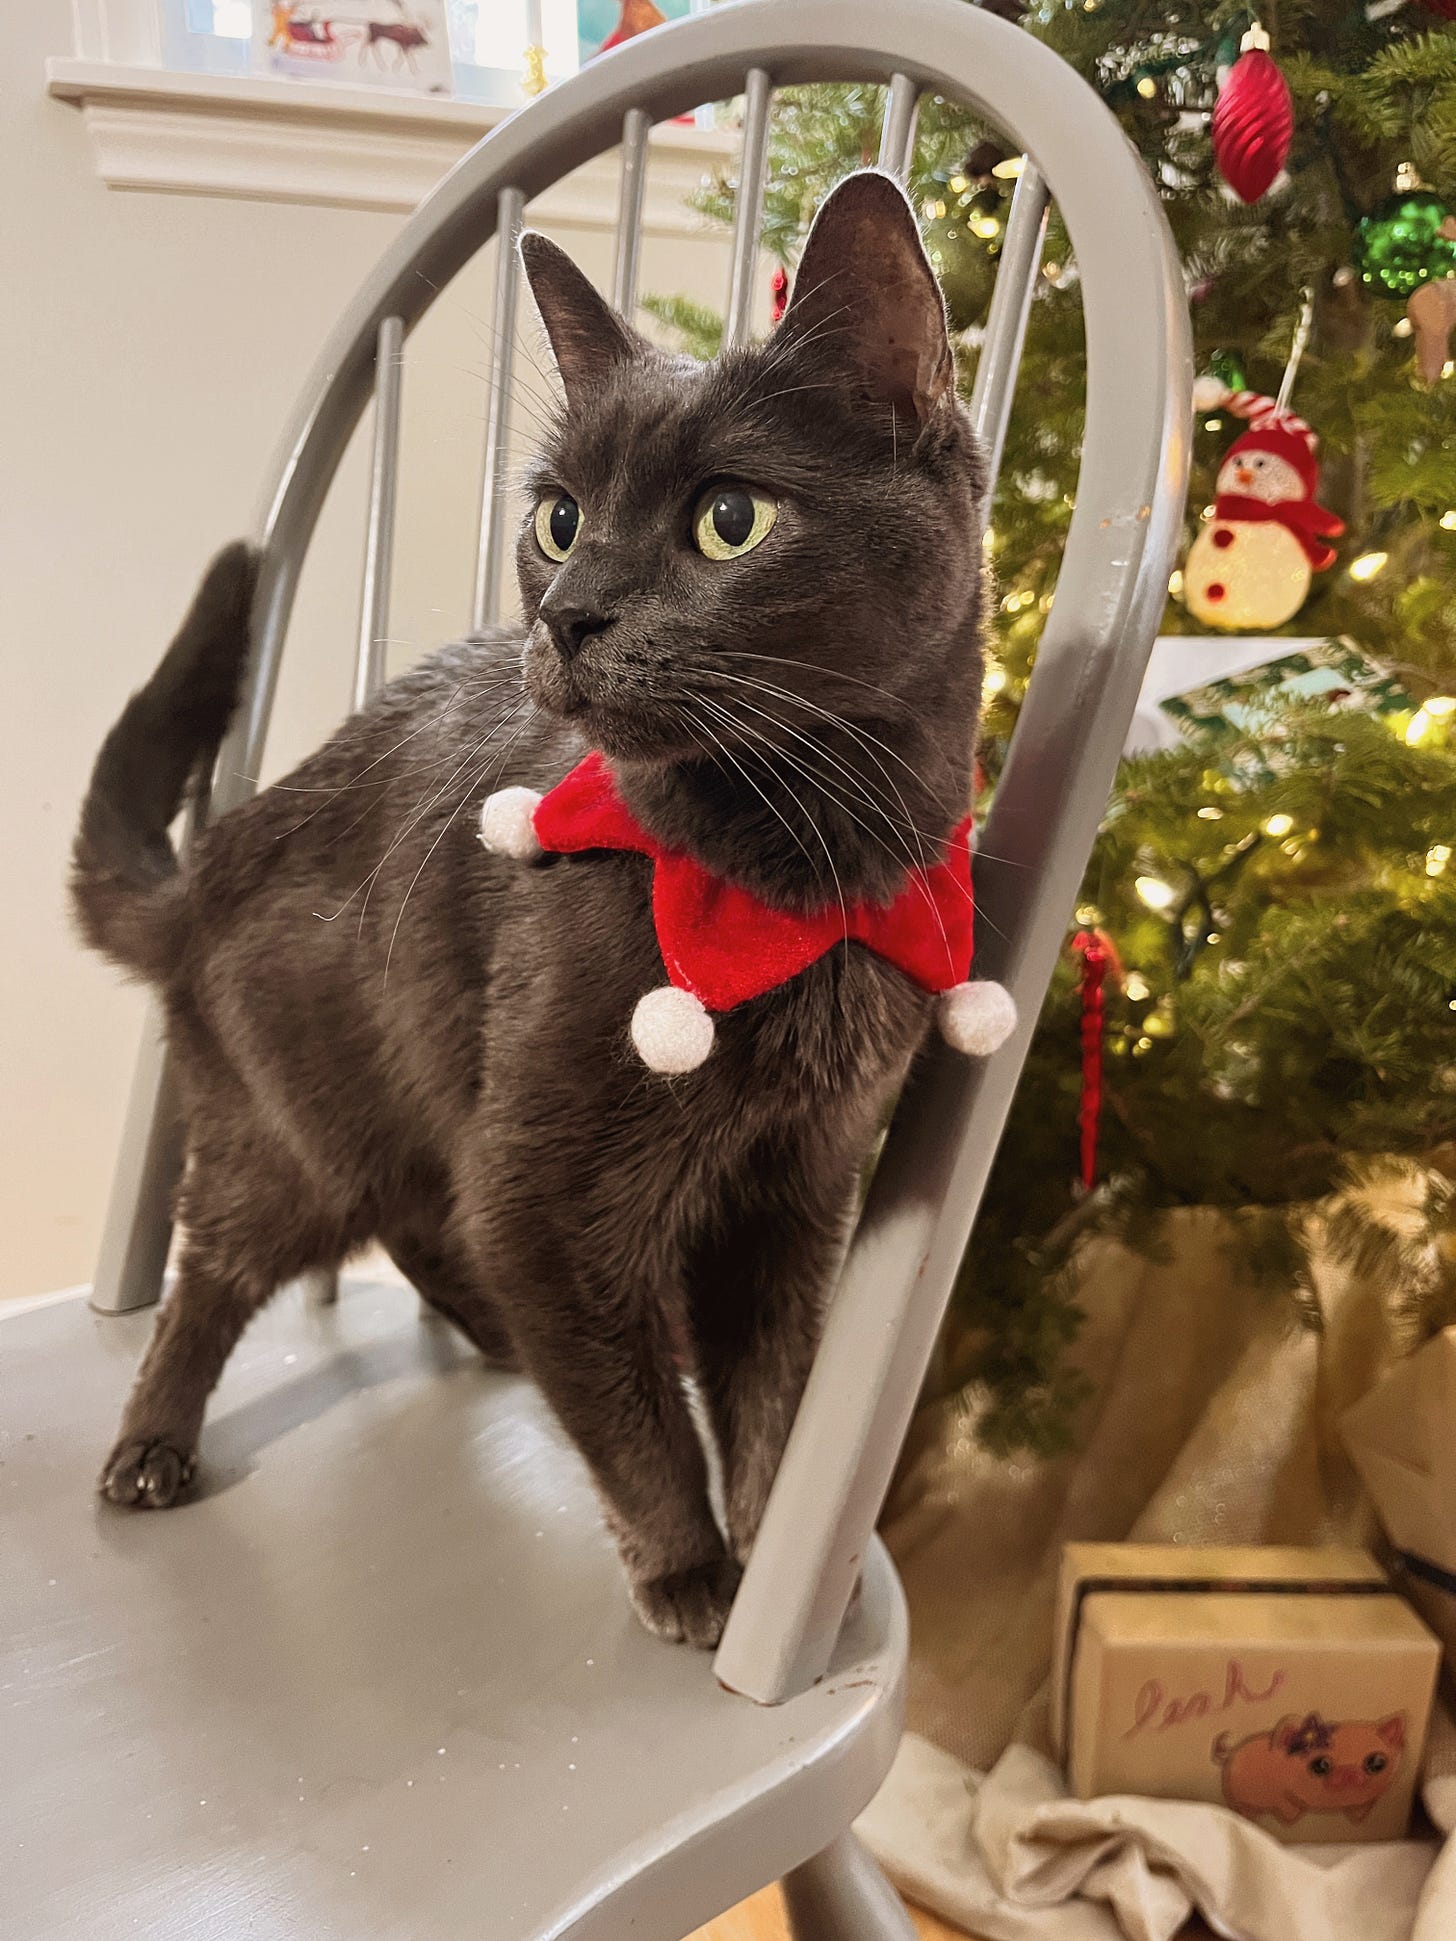 My gret cat Katoomba wearing a plush red collar with white pom-poms on the ends, standing on a grey chair by our Christmas tree.